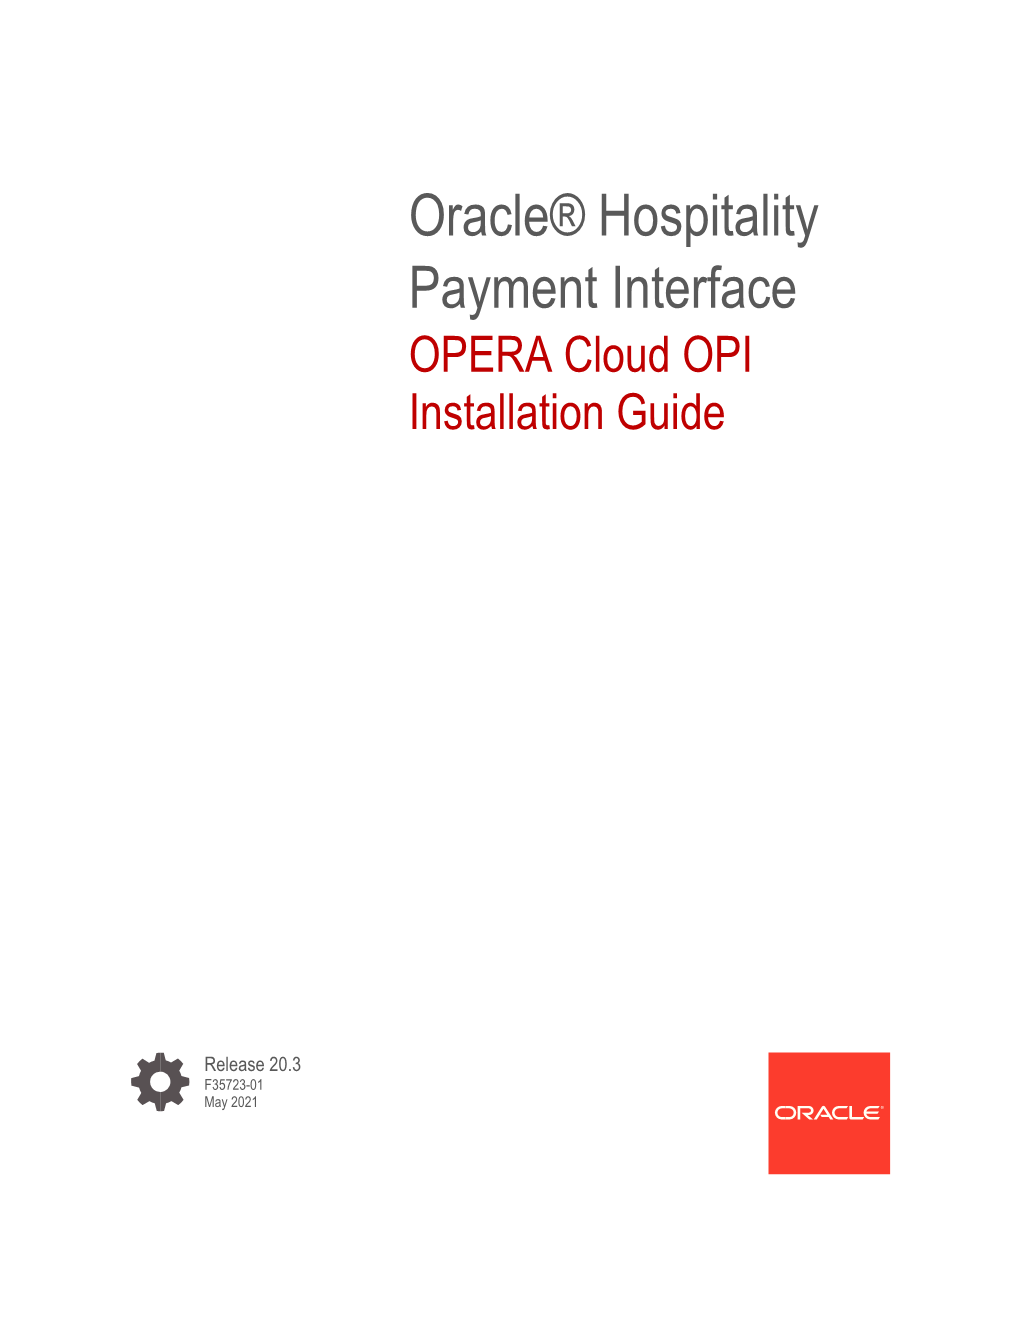 OPERA Cloud OPI Installation Guide Release 20.3 F35723-01 Copyright © 2010, 2021, Oracle And/Or Its Affiliates